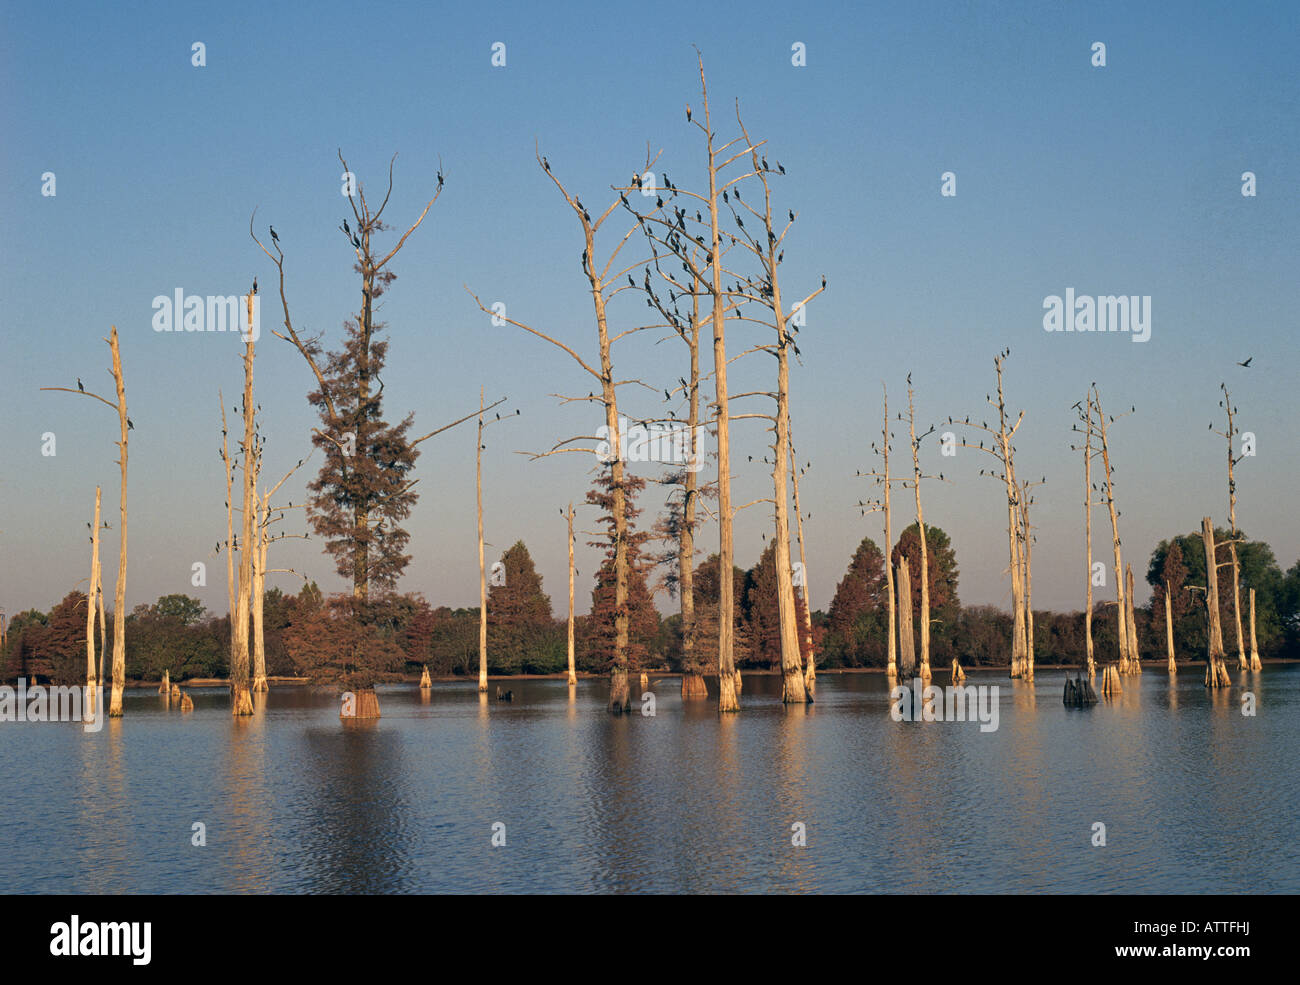 A black cypress swamp in which the trees are covered with nesting cormorant birds Stock Photo